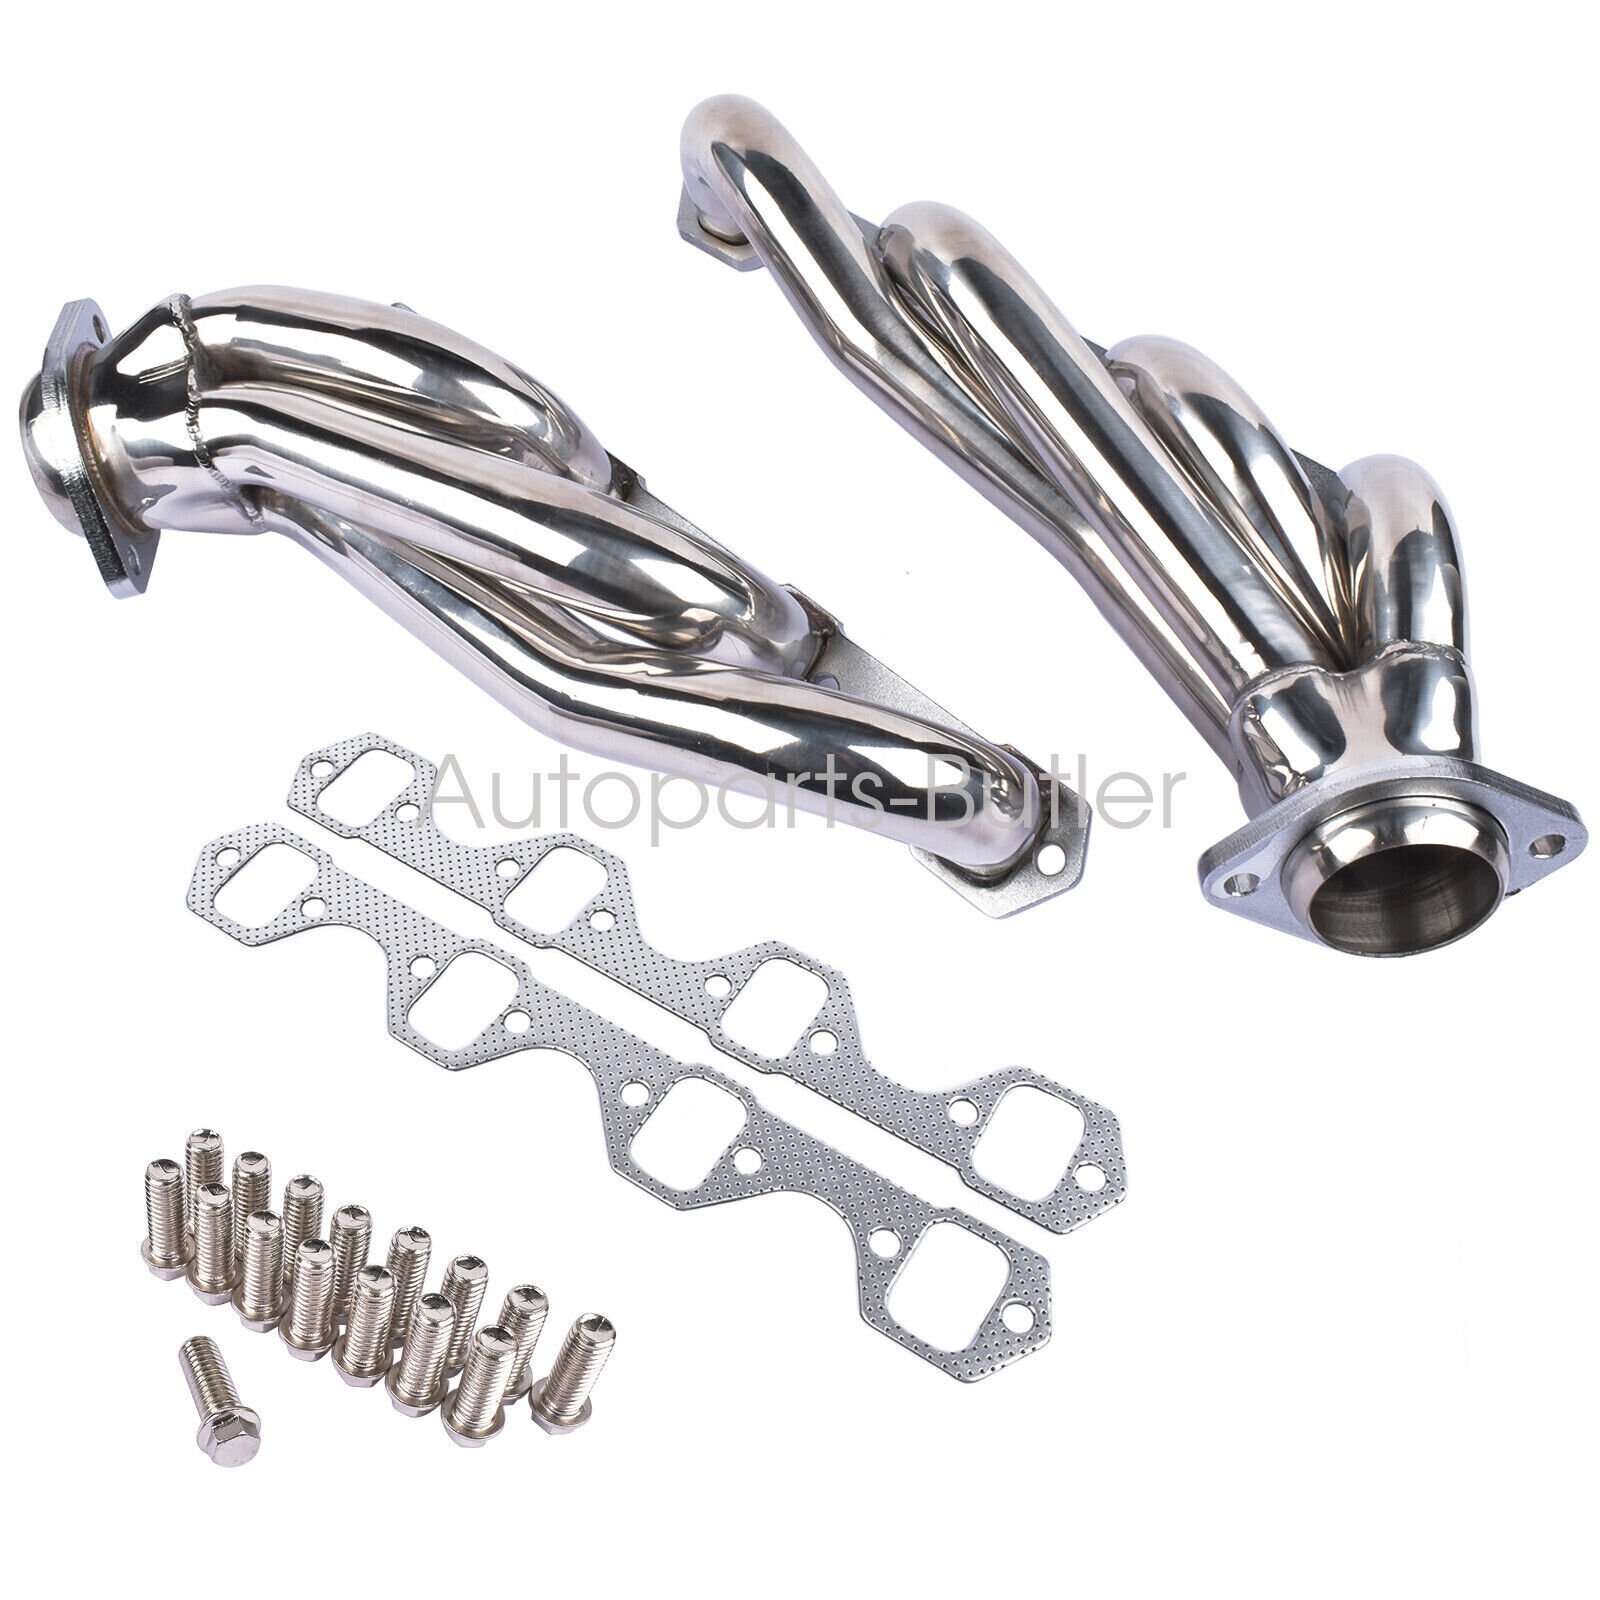 Exhaust Manifold Headers for 1979-1993 Mustang 5.0 V8 GT/LX/SVT Stainless Steel